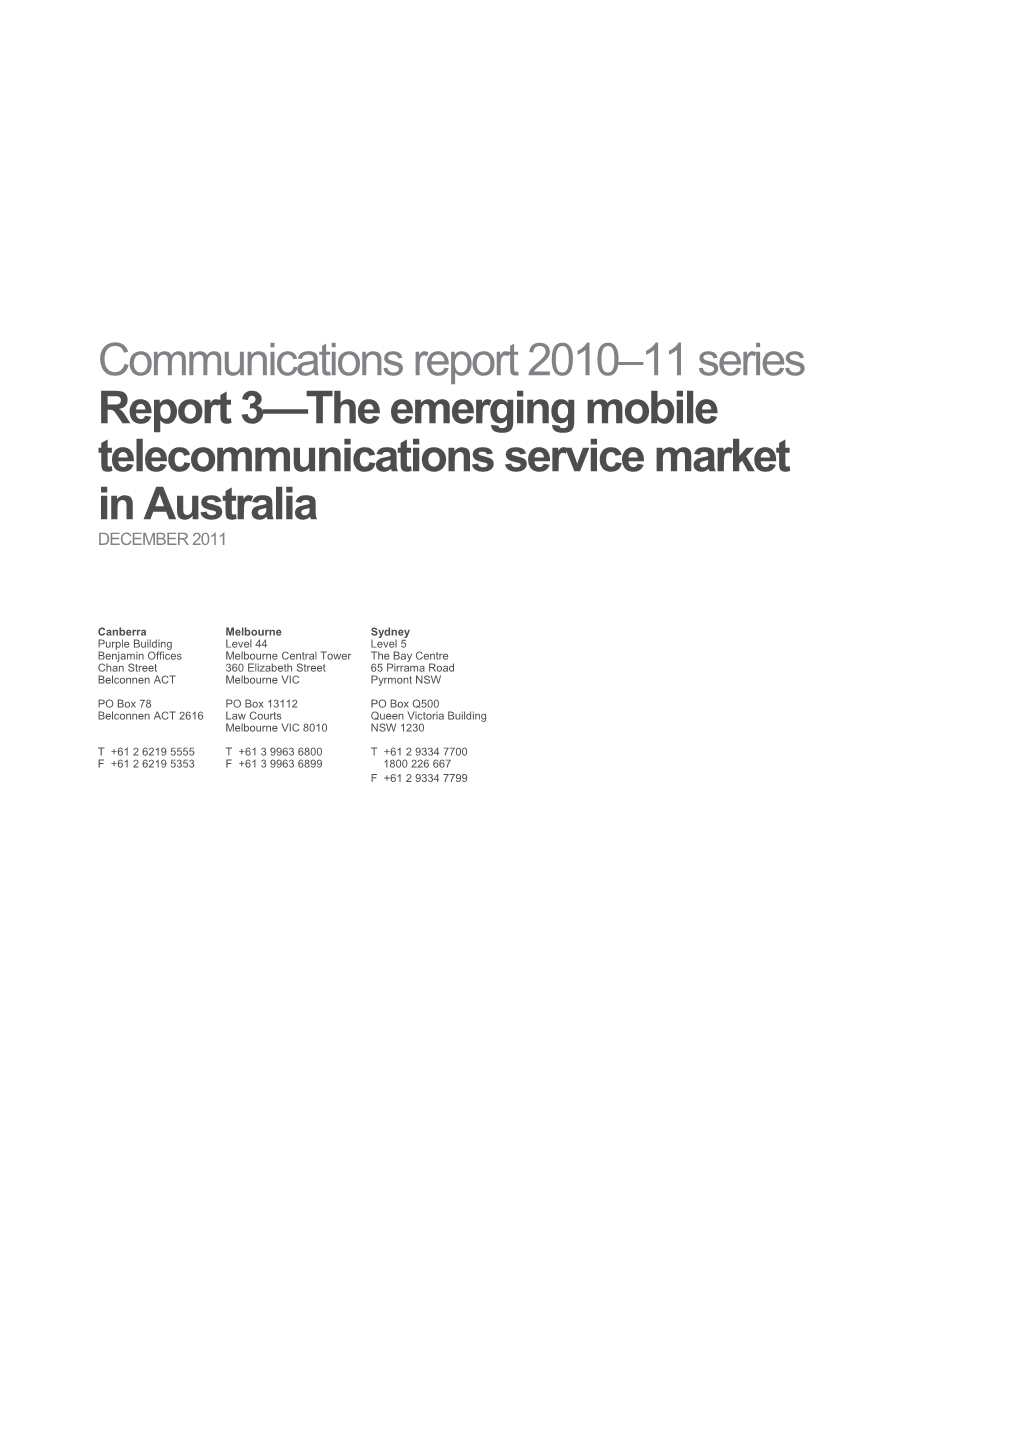 Communications Report 2010 11 Seriesreport 3 the Emerging Mobile Telecommunications Service